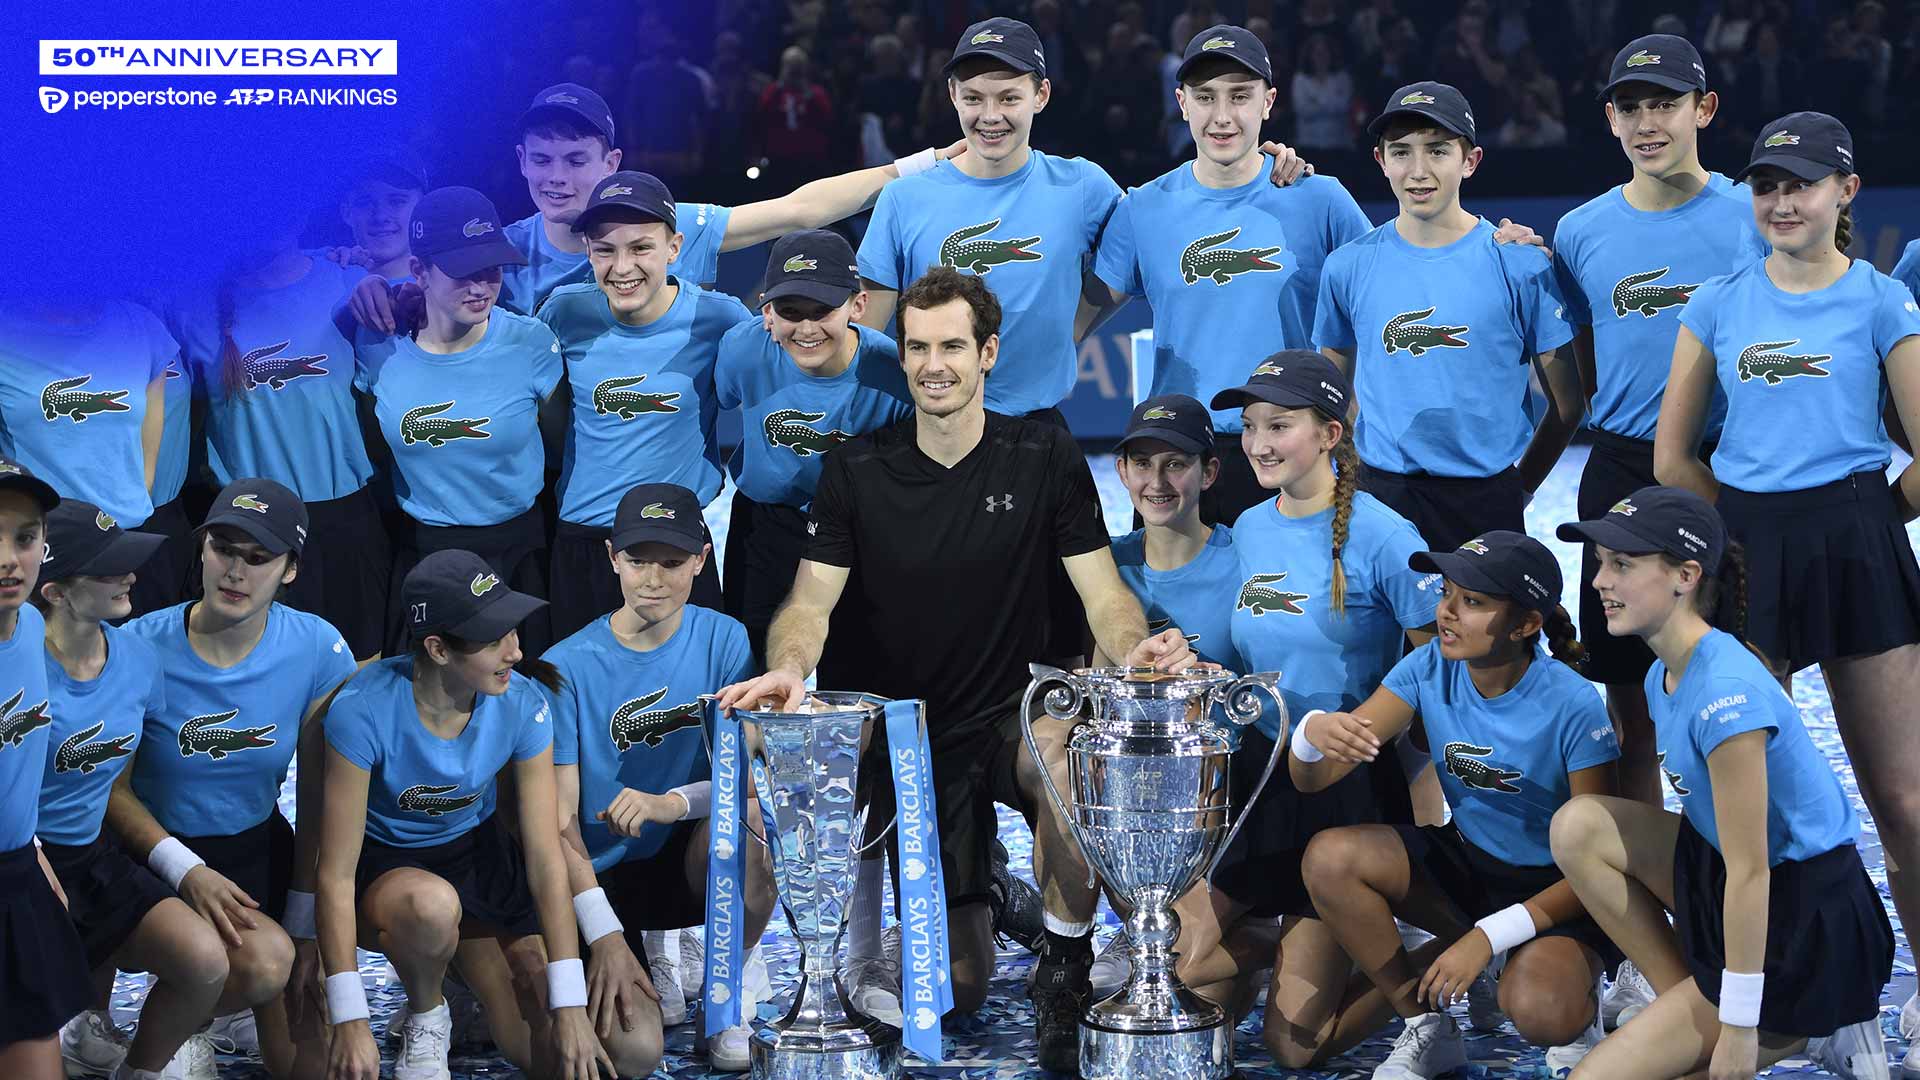 Andy Murray claimed ATP Year-End No 1 presented by Pepperstone in a winner-takes-all final with Novak Djokovic in London in 2016.